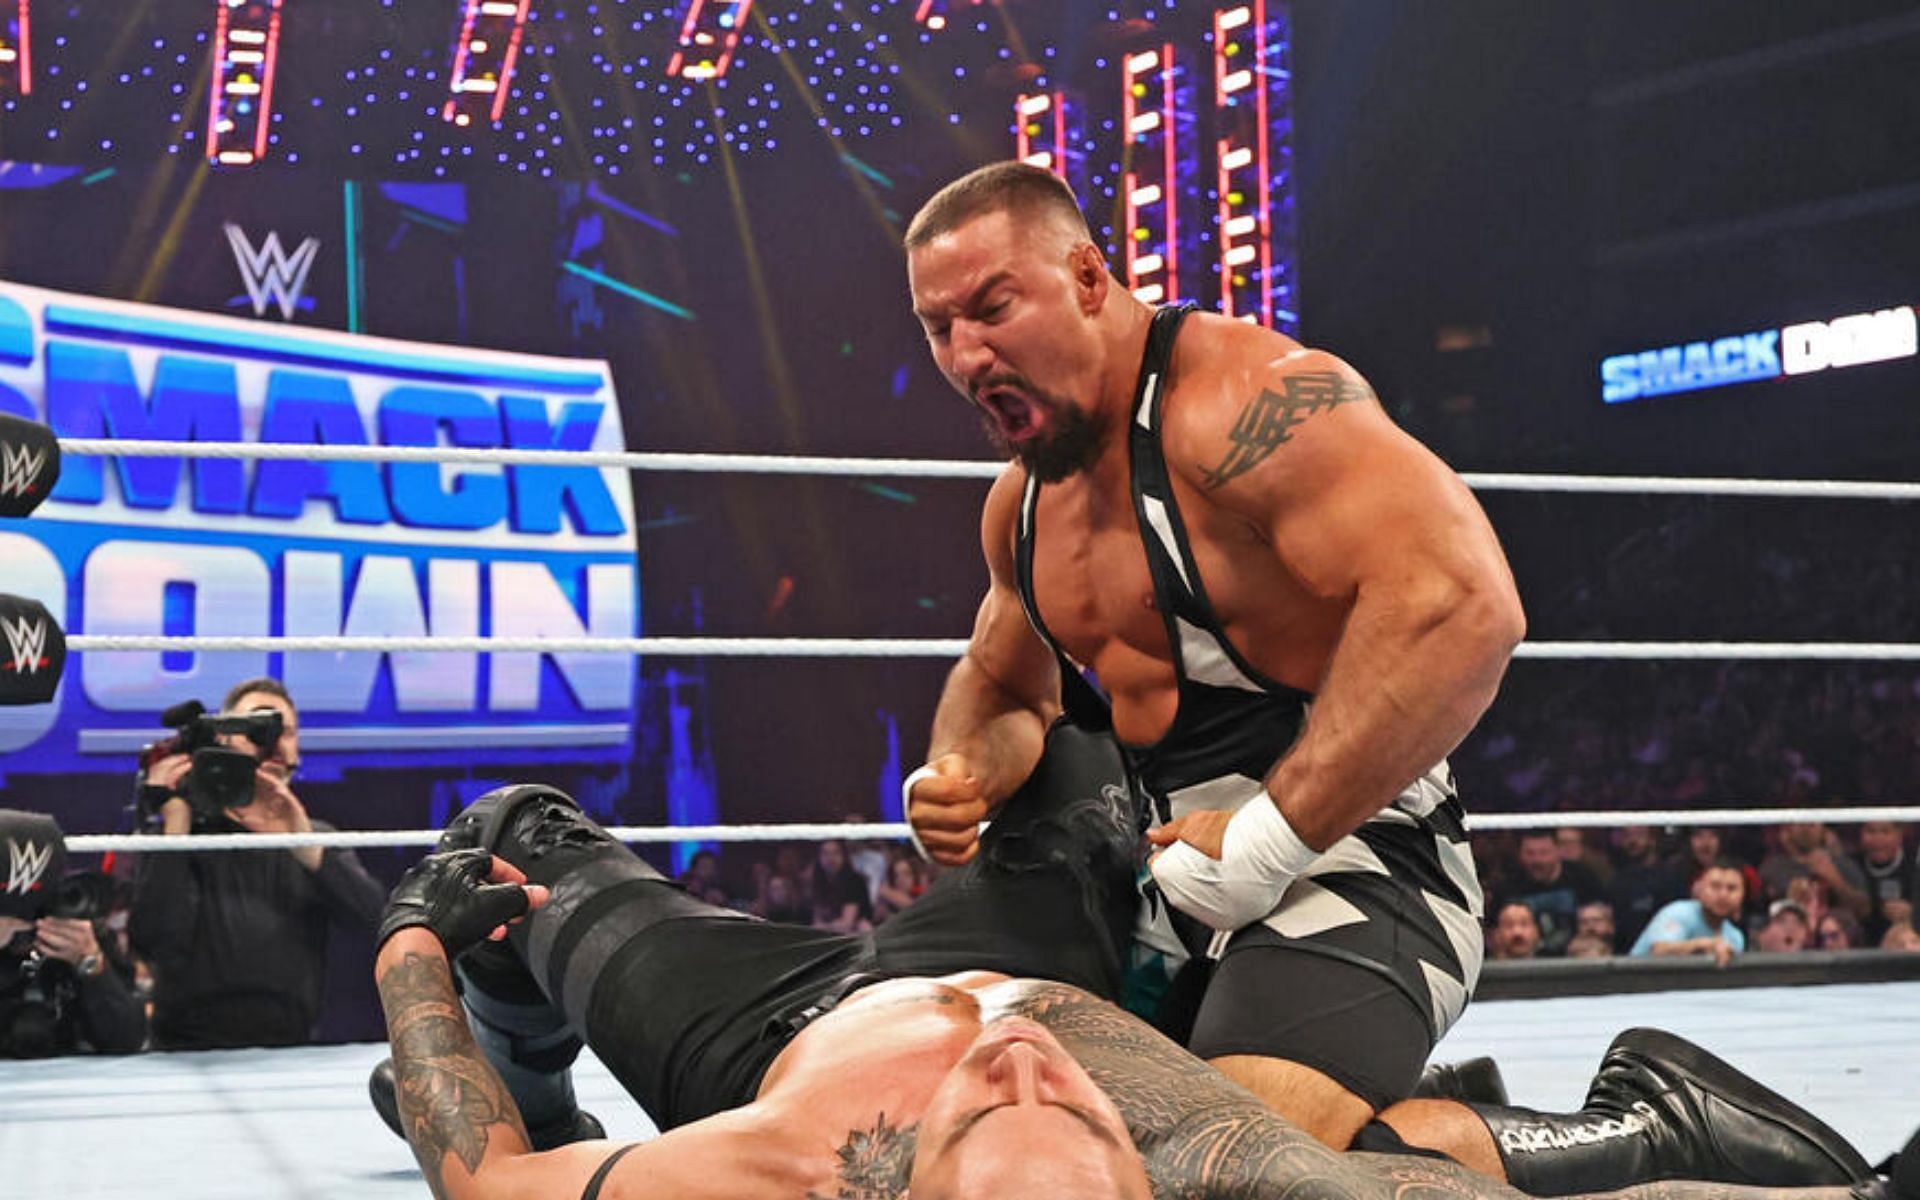 The former NXT Champion has had two dominant performances on SmackDown